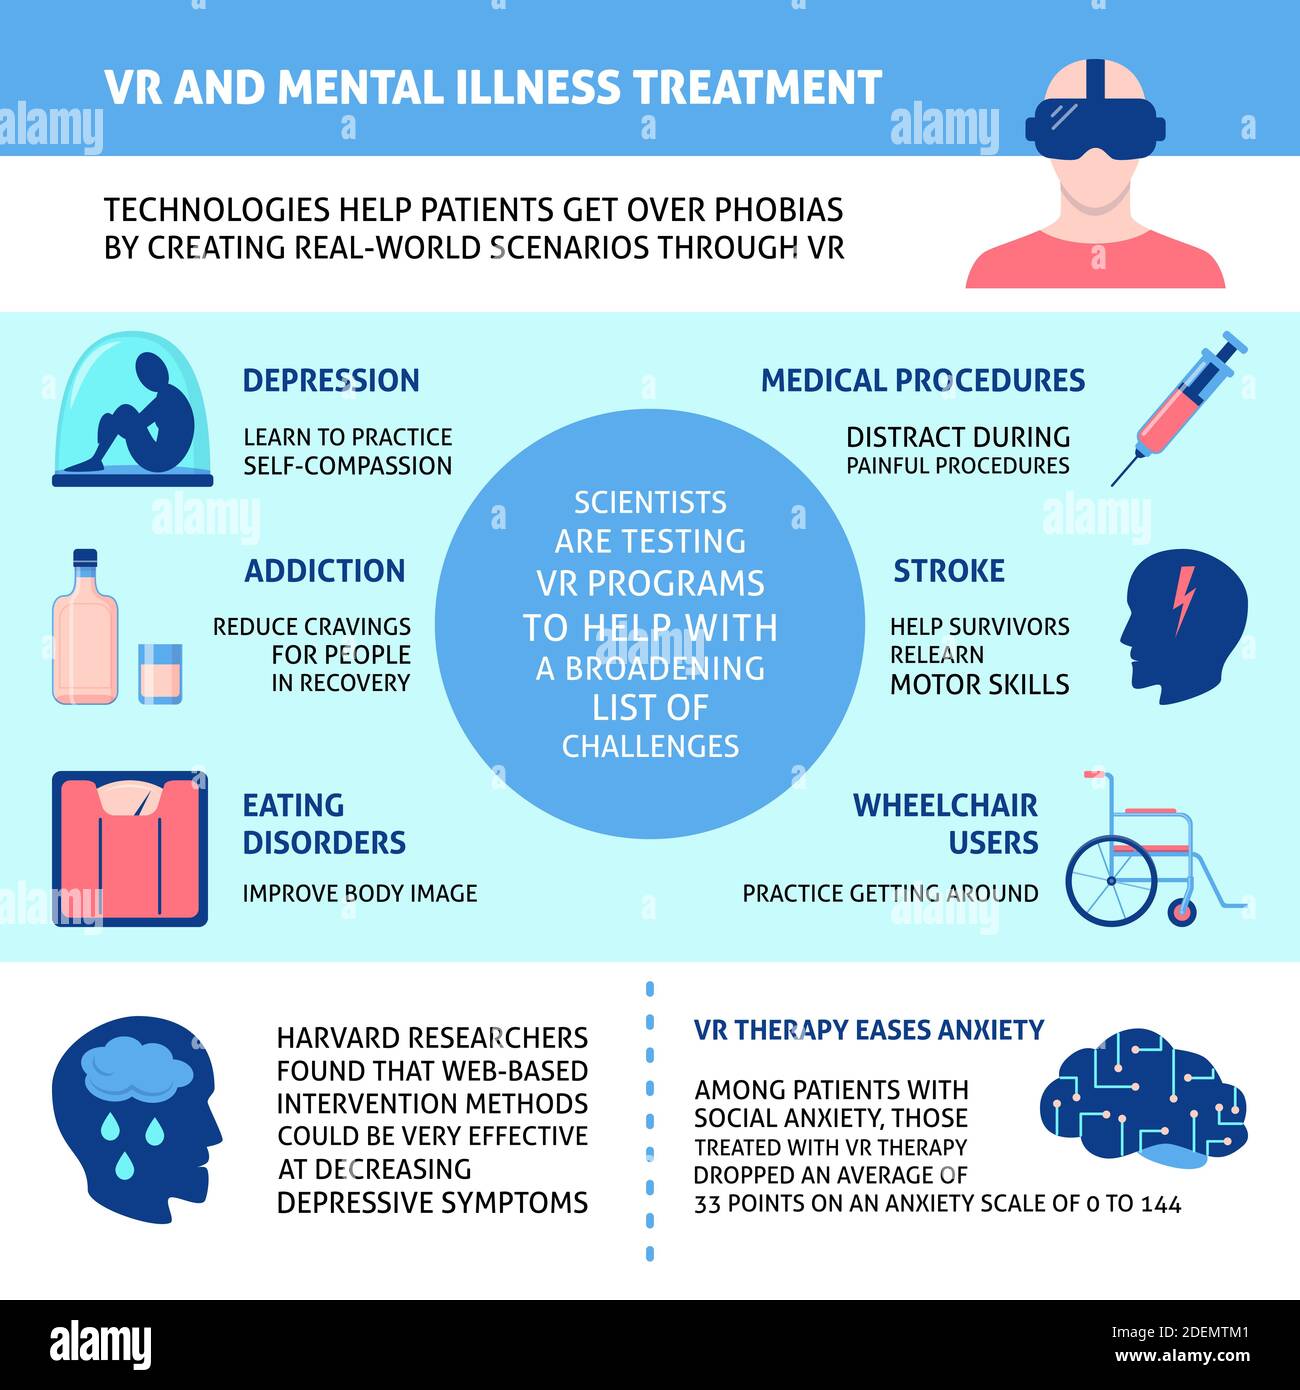 Virtual Reality and Mental Health: Opportunities and Challenges